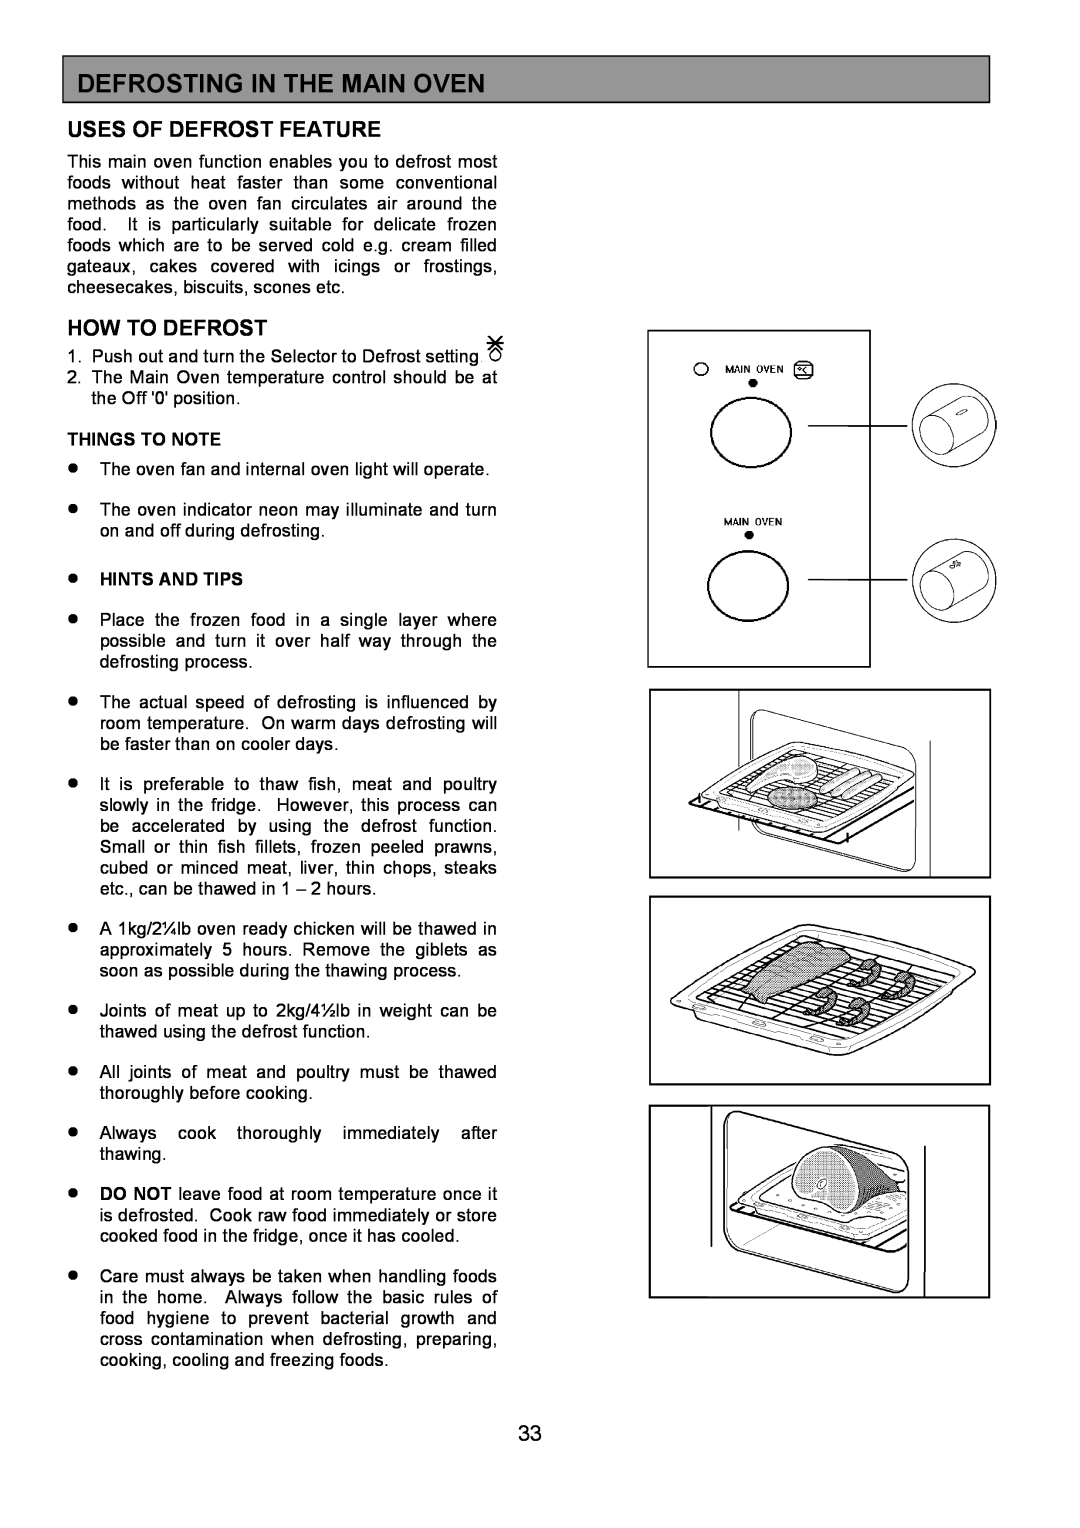 Zanussi 311608901 Defrosting In The Main Oven, Uses Of Defrost Feature, How To Defrost, Things To Note, Hints And Tips 